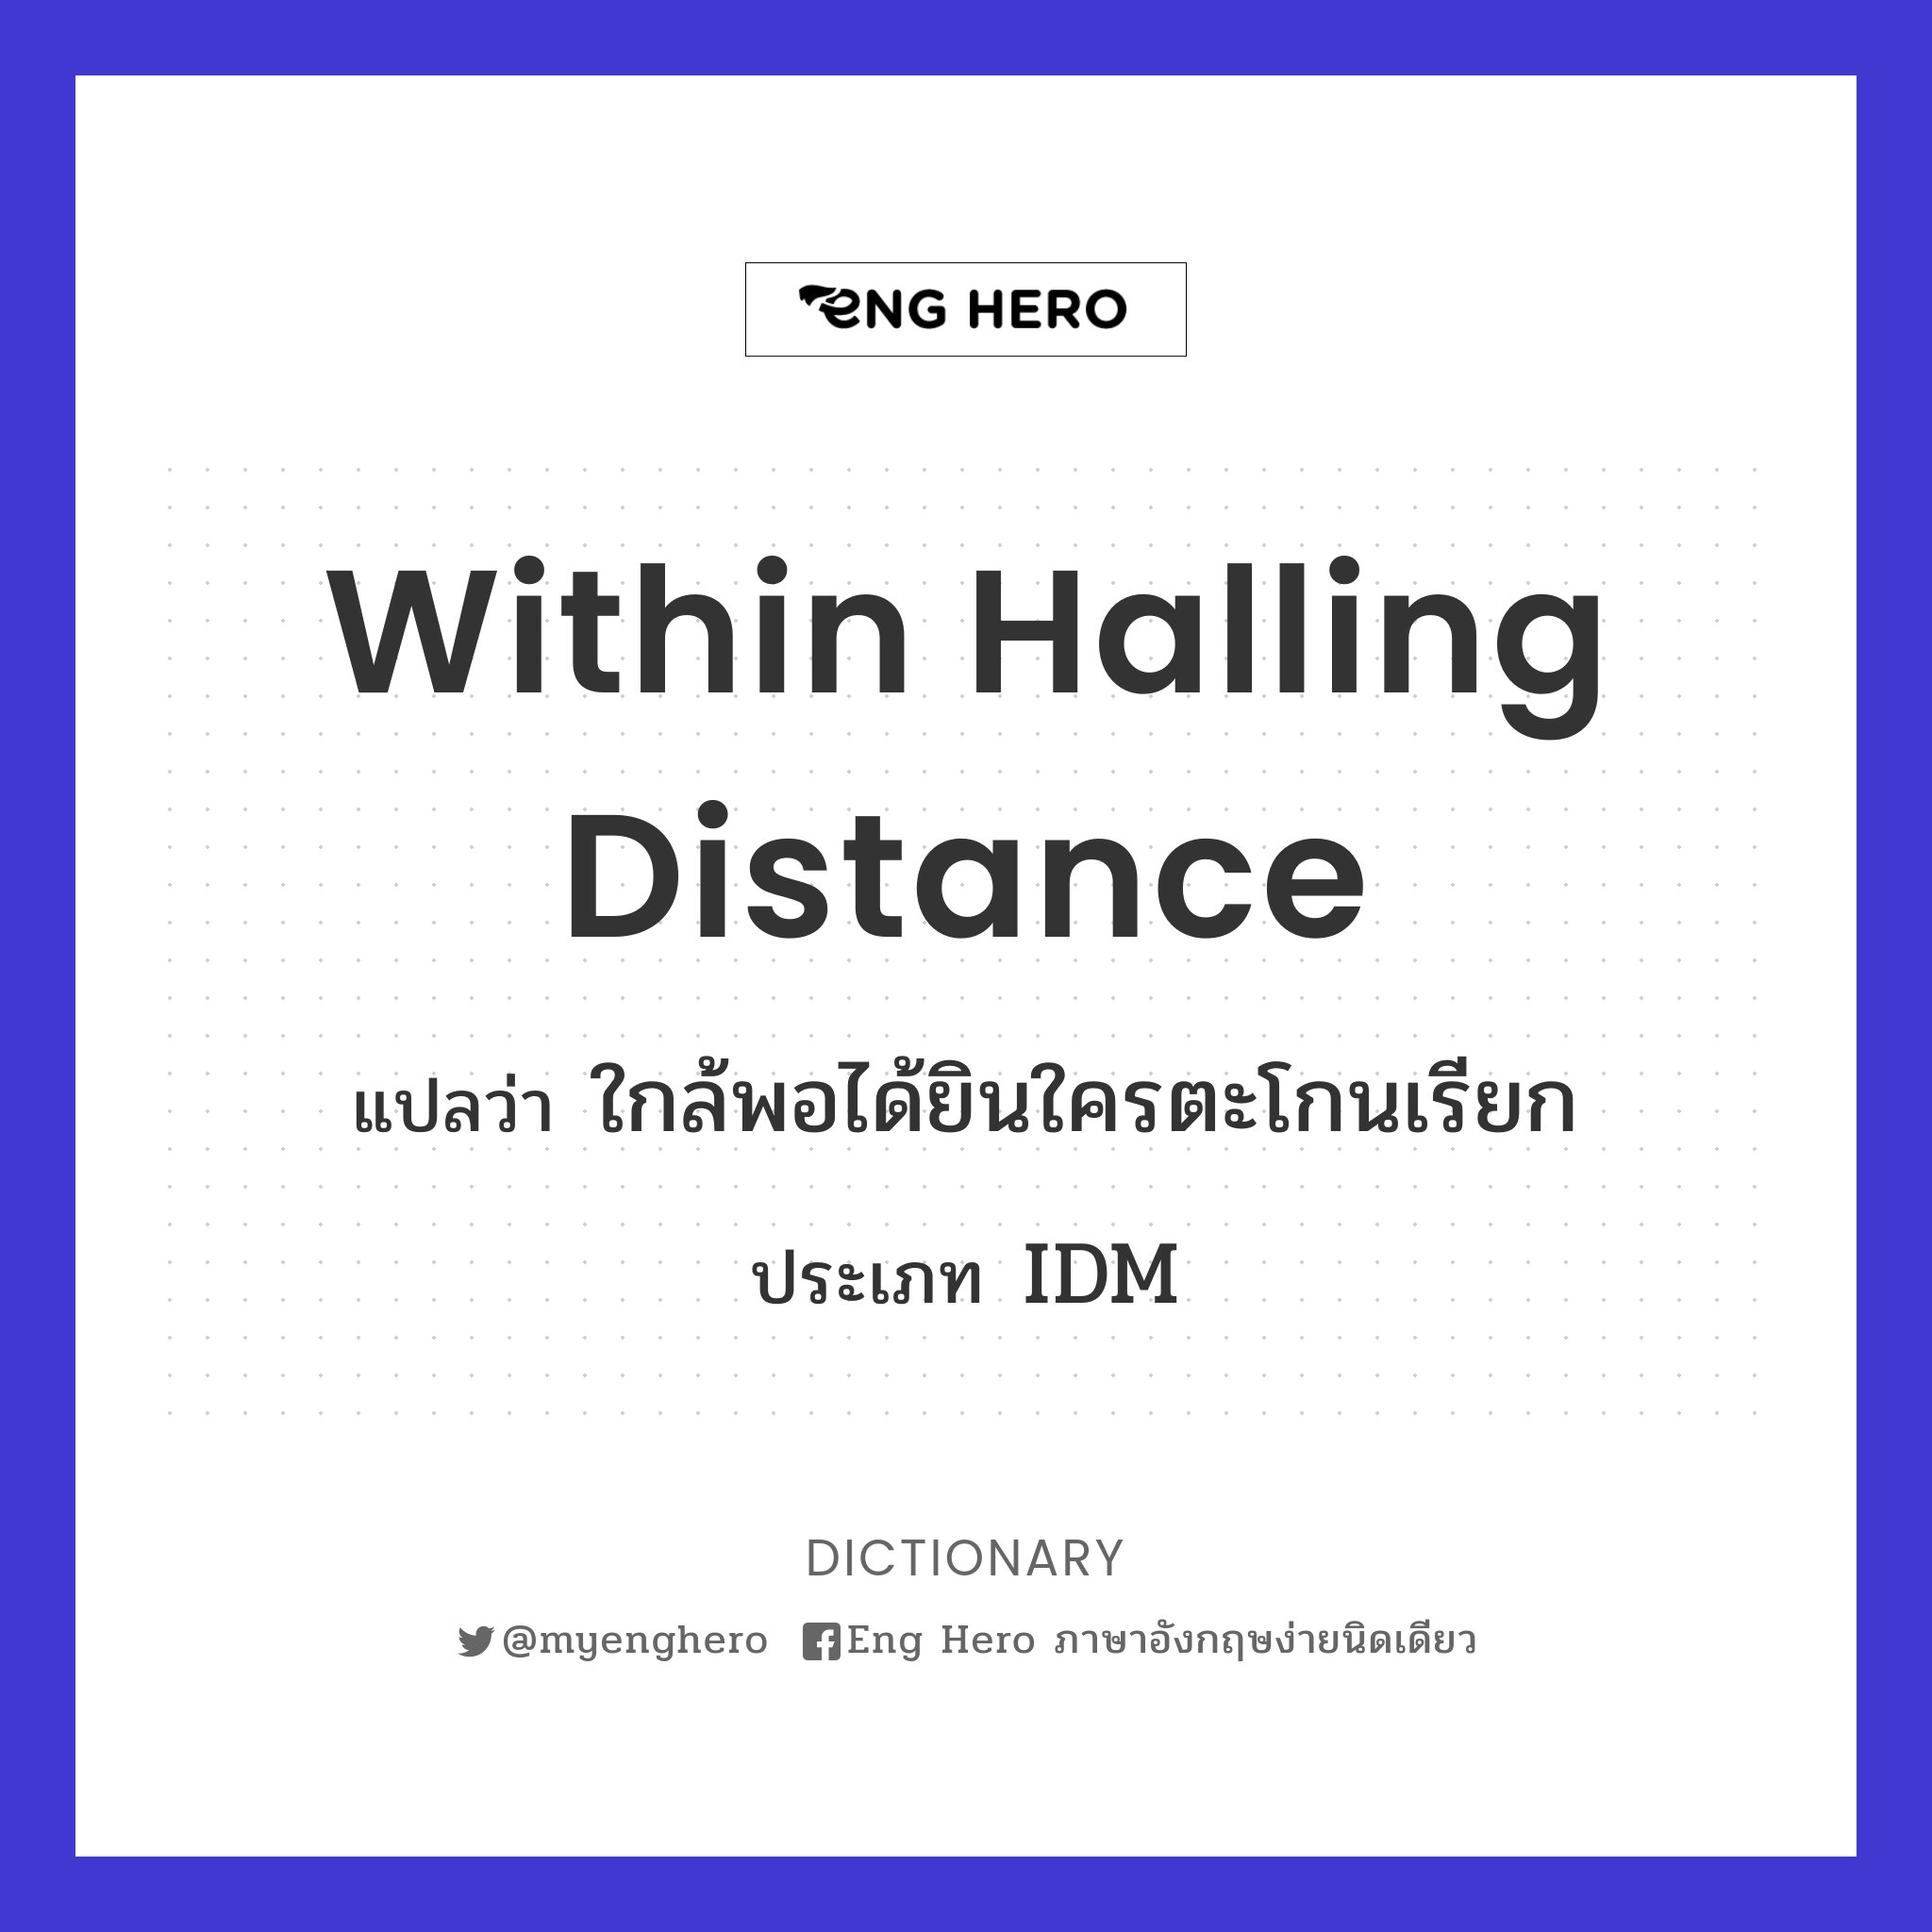 within halling distance